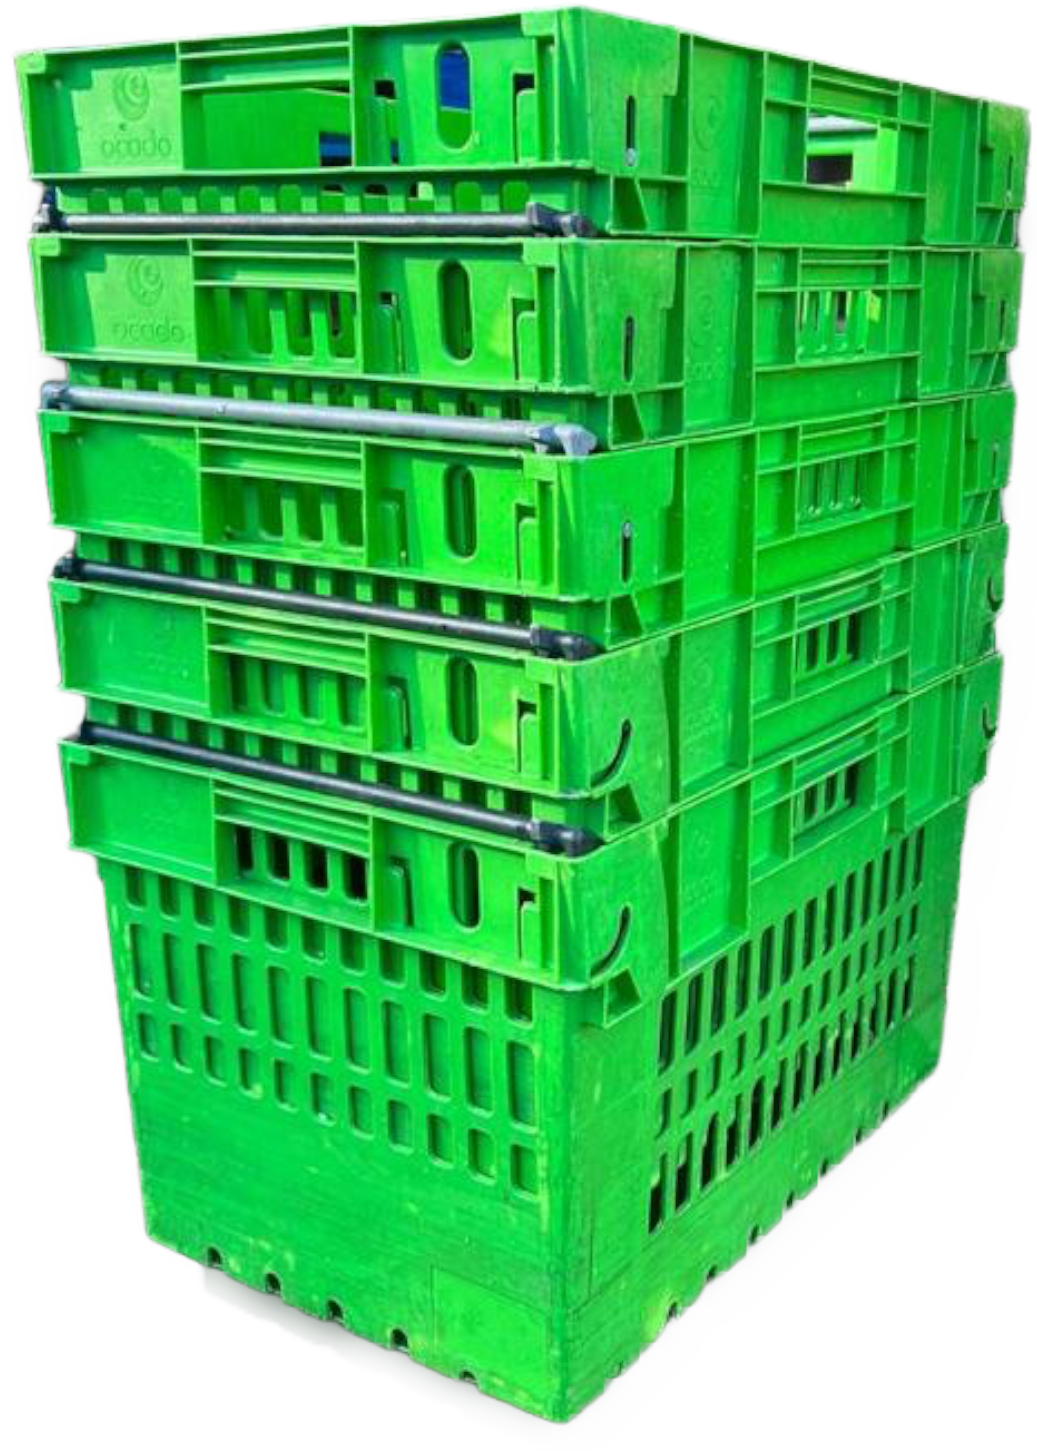 UK Suppliers Of 400x300x300 Black Eco Lidded Container (28 Ltr) For The Retail Sector